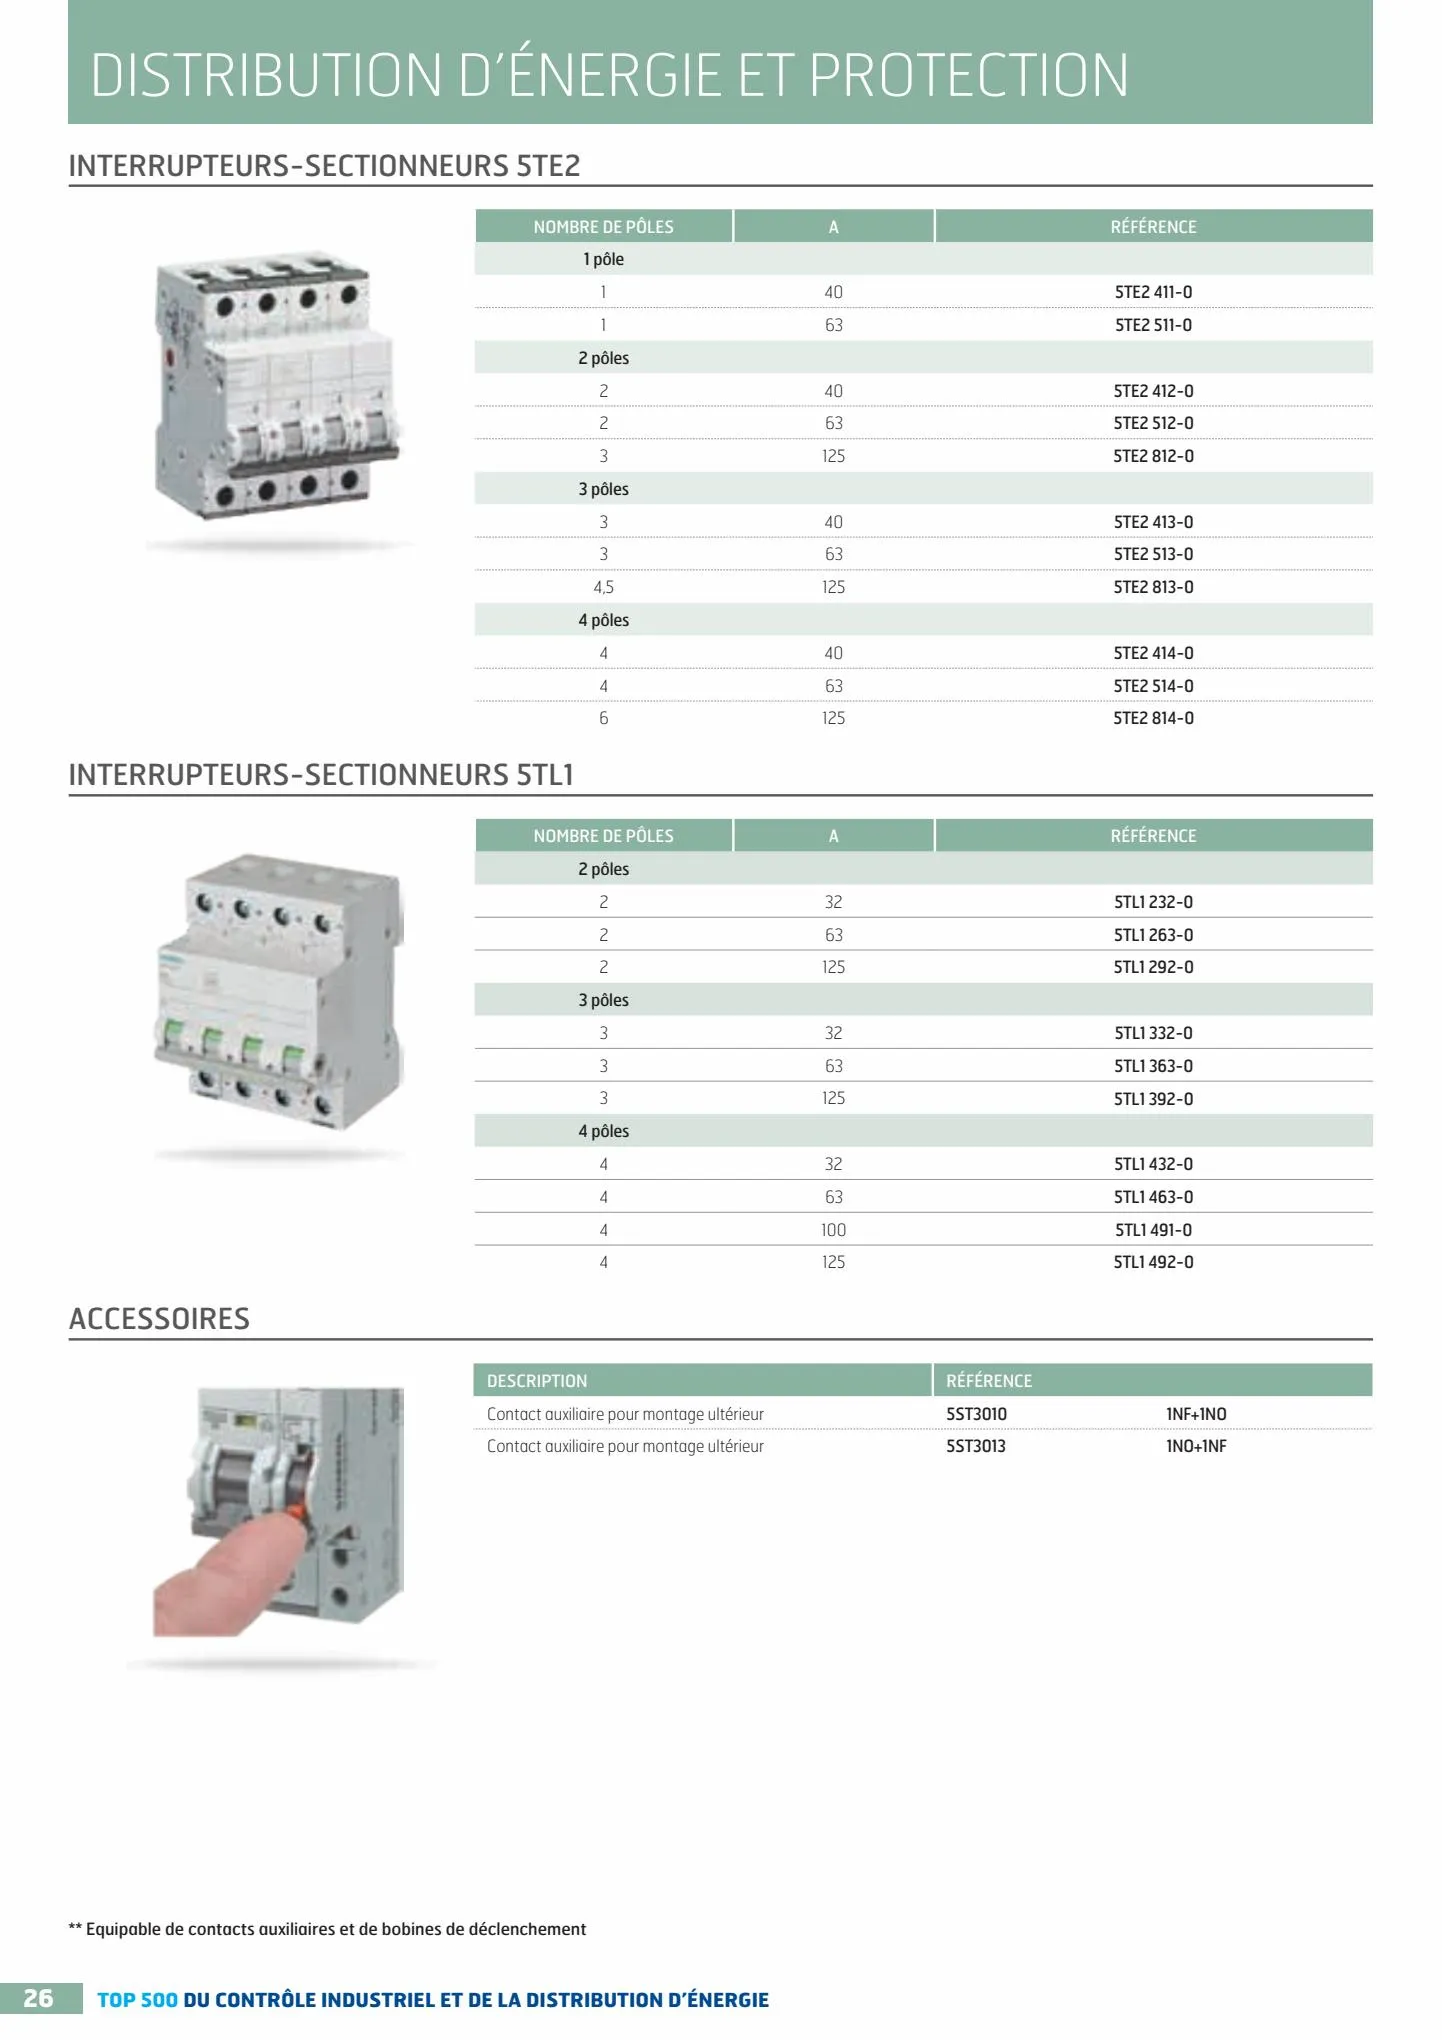 Catalogue TOP 500 siemens, page 00026